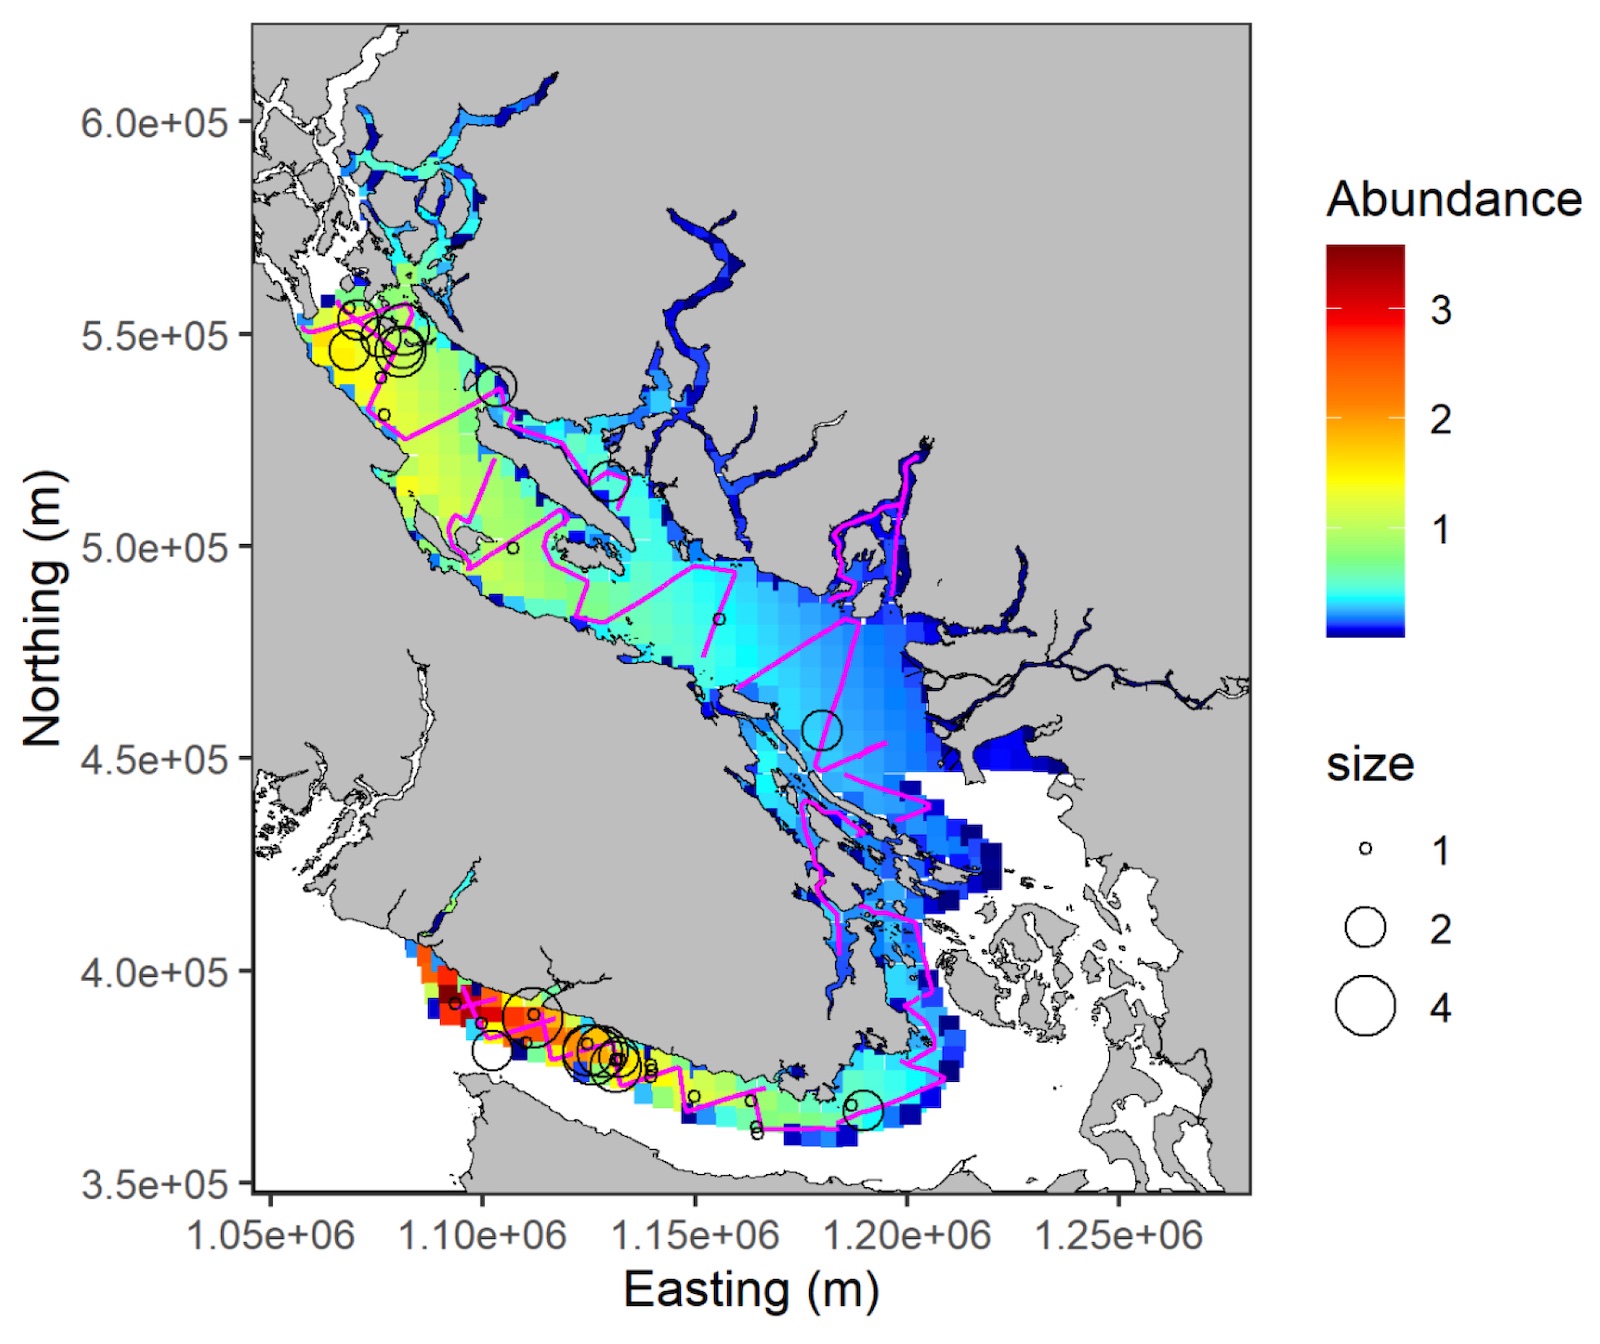 A map shows an area ringing Vancouver Island. The water is colour-coded based on estimated humpback whale densities.